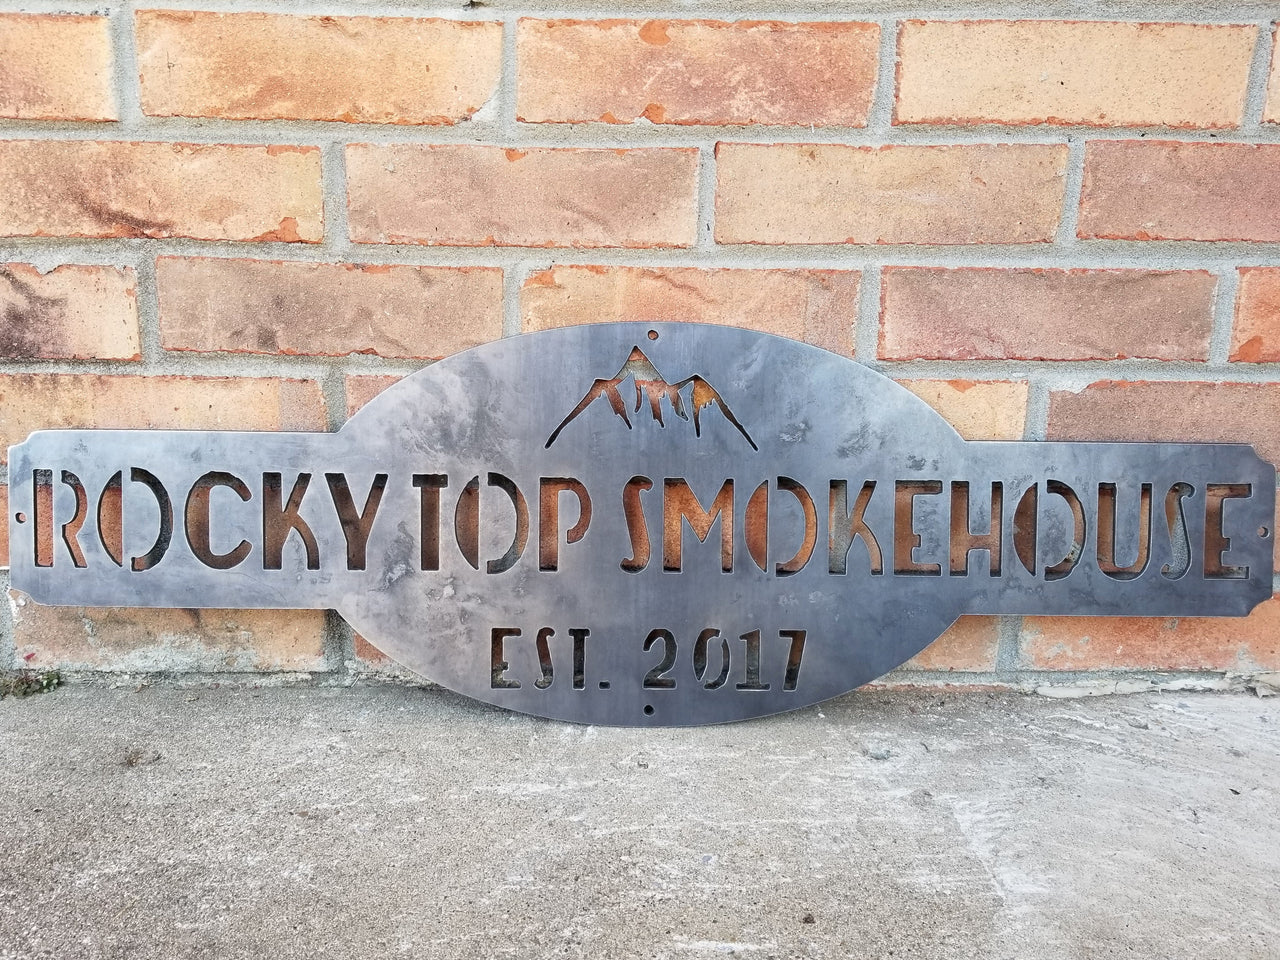 This is a raw steel, custom metal sign.  At the top of the sign is an image of mountains. There is two lines of text on this sign which reads, "Rockytop Smokehouse, Est. 2017"